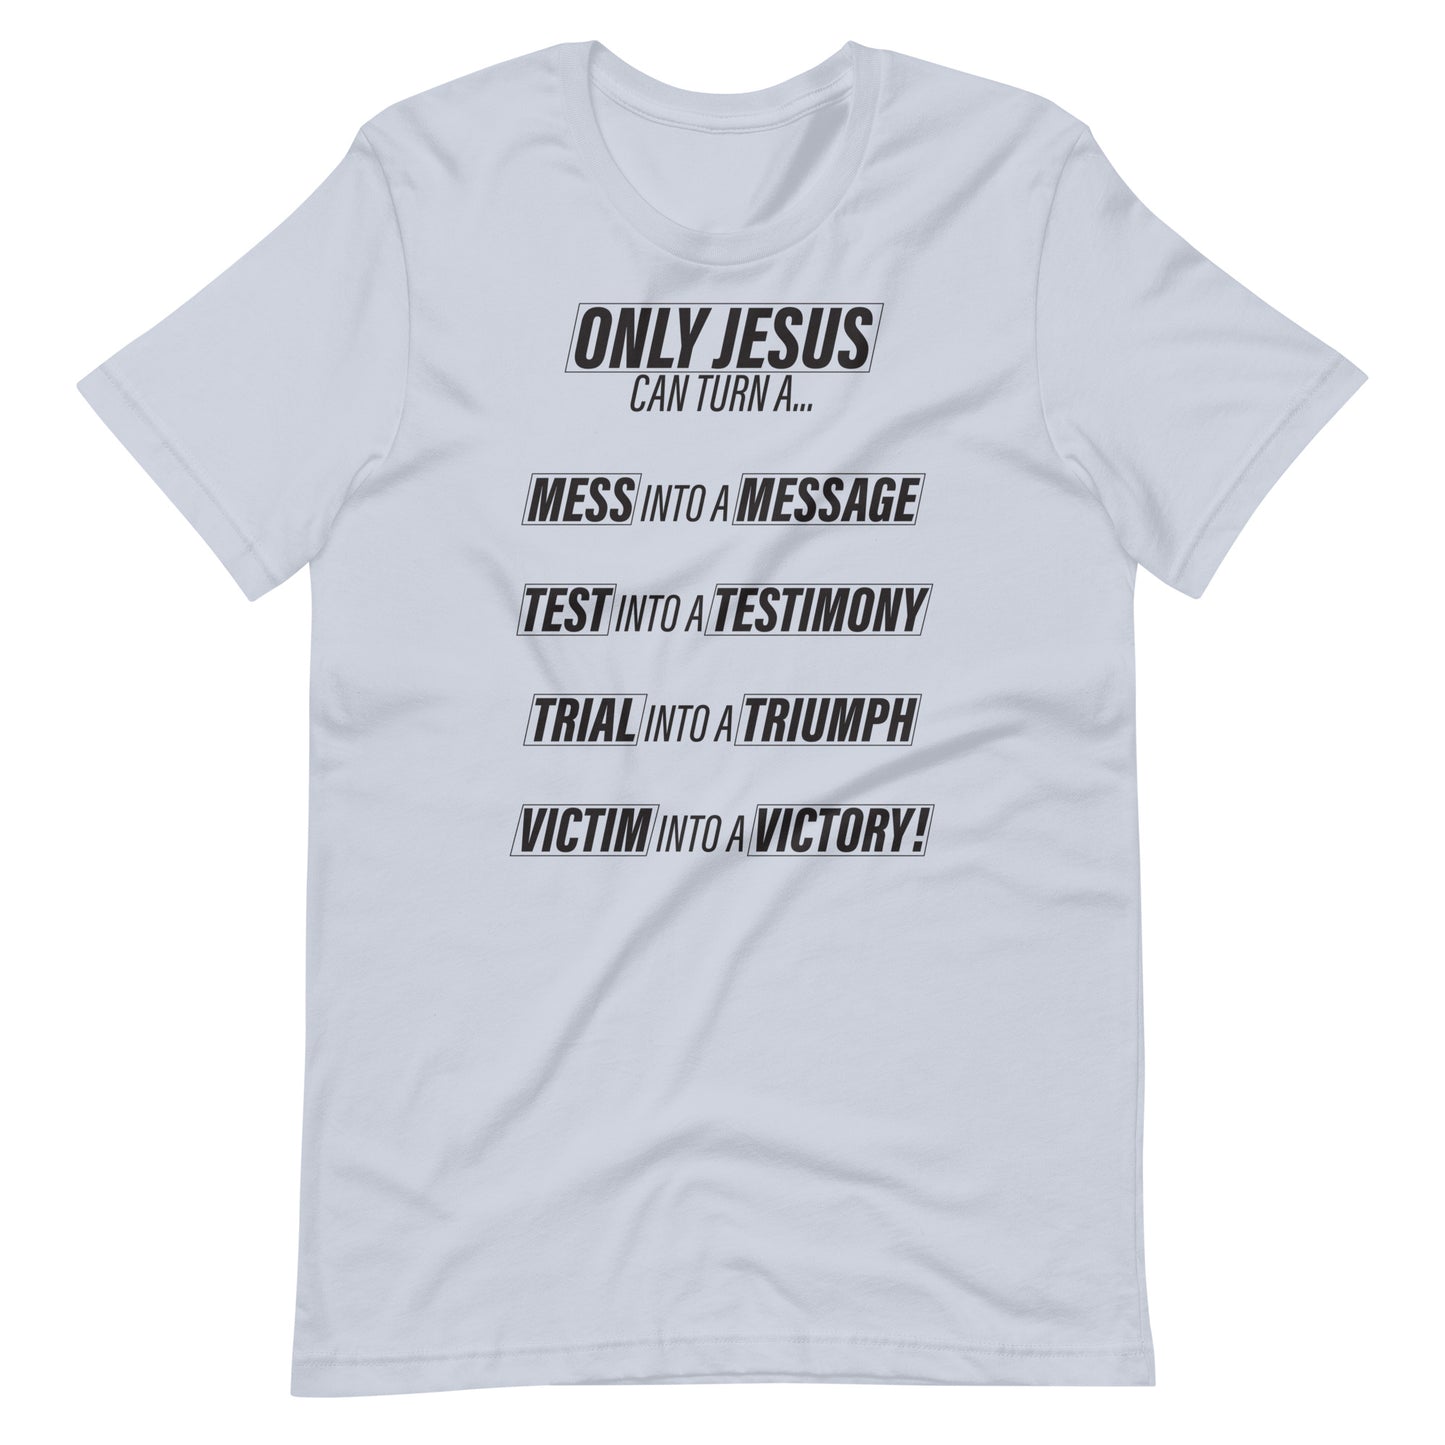 Only Jesus Can Turn a.... Unisex t-shirt